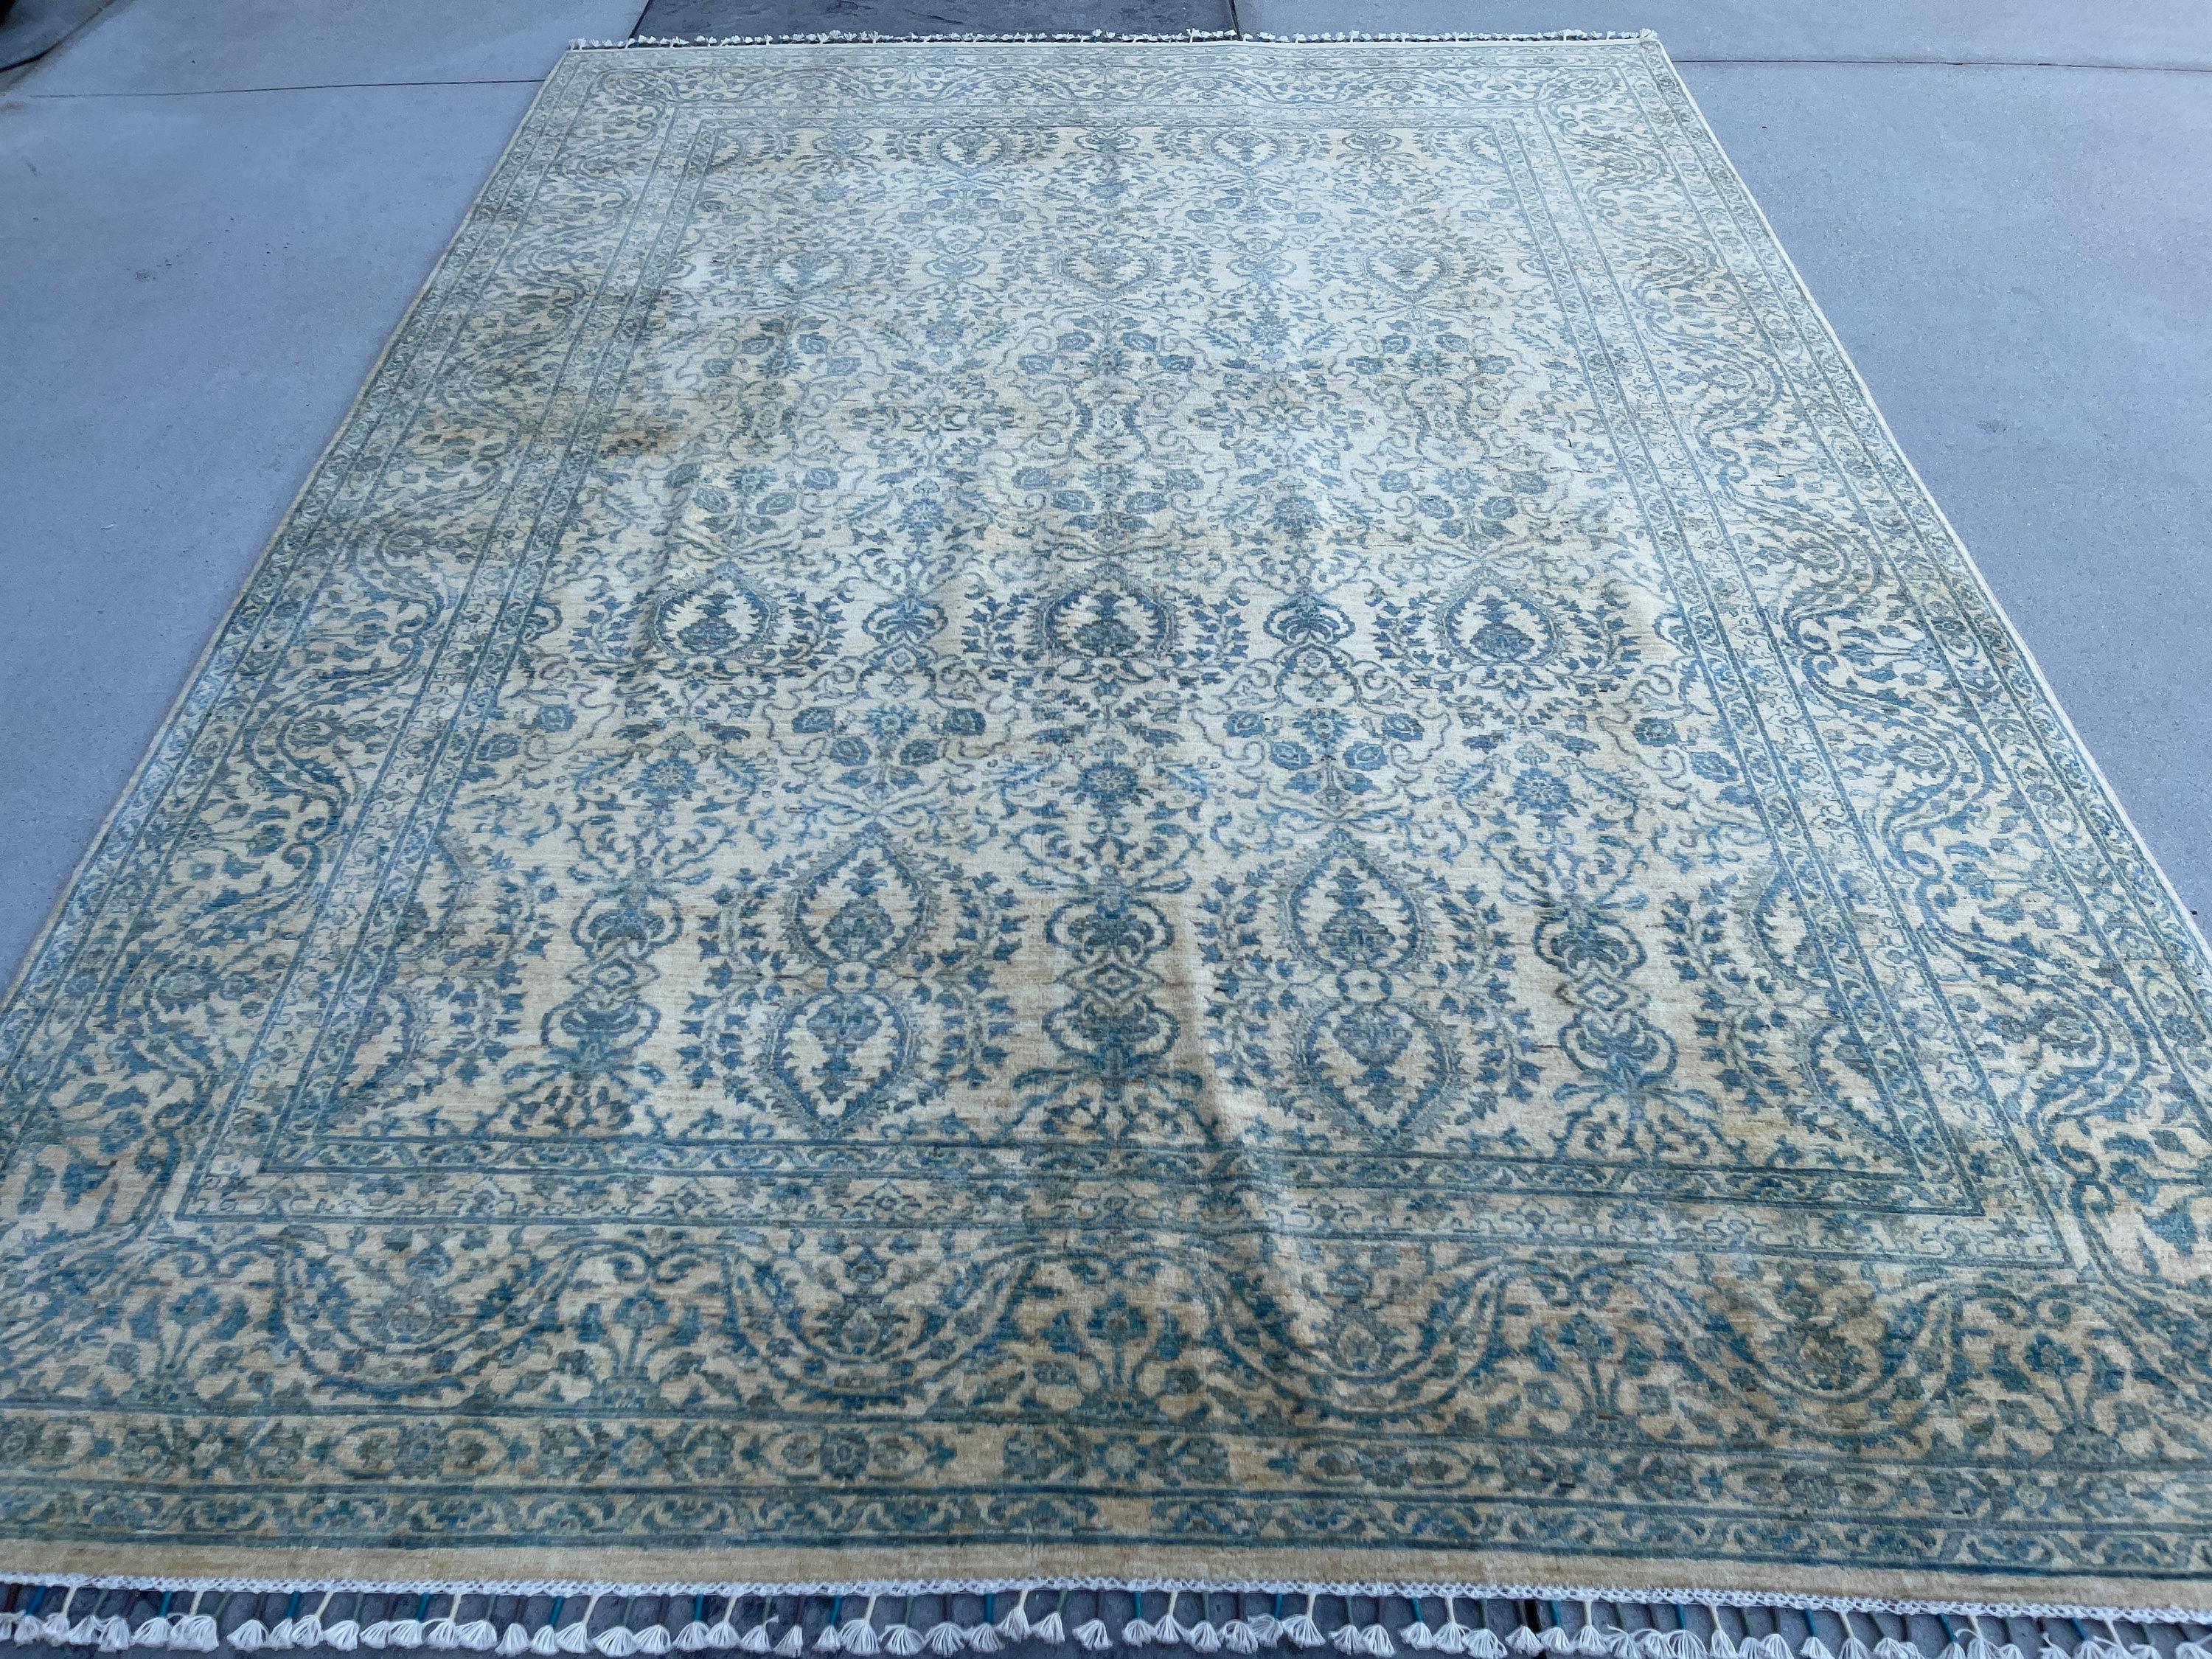 Hand-Knotted Muted Afghan Rug Premium Hand-Spun Afghan Wool Fair Trade In New Condition For Sale In San Marcos, CA